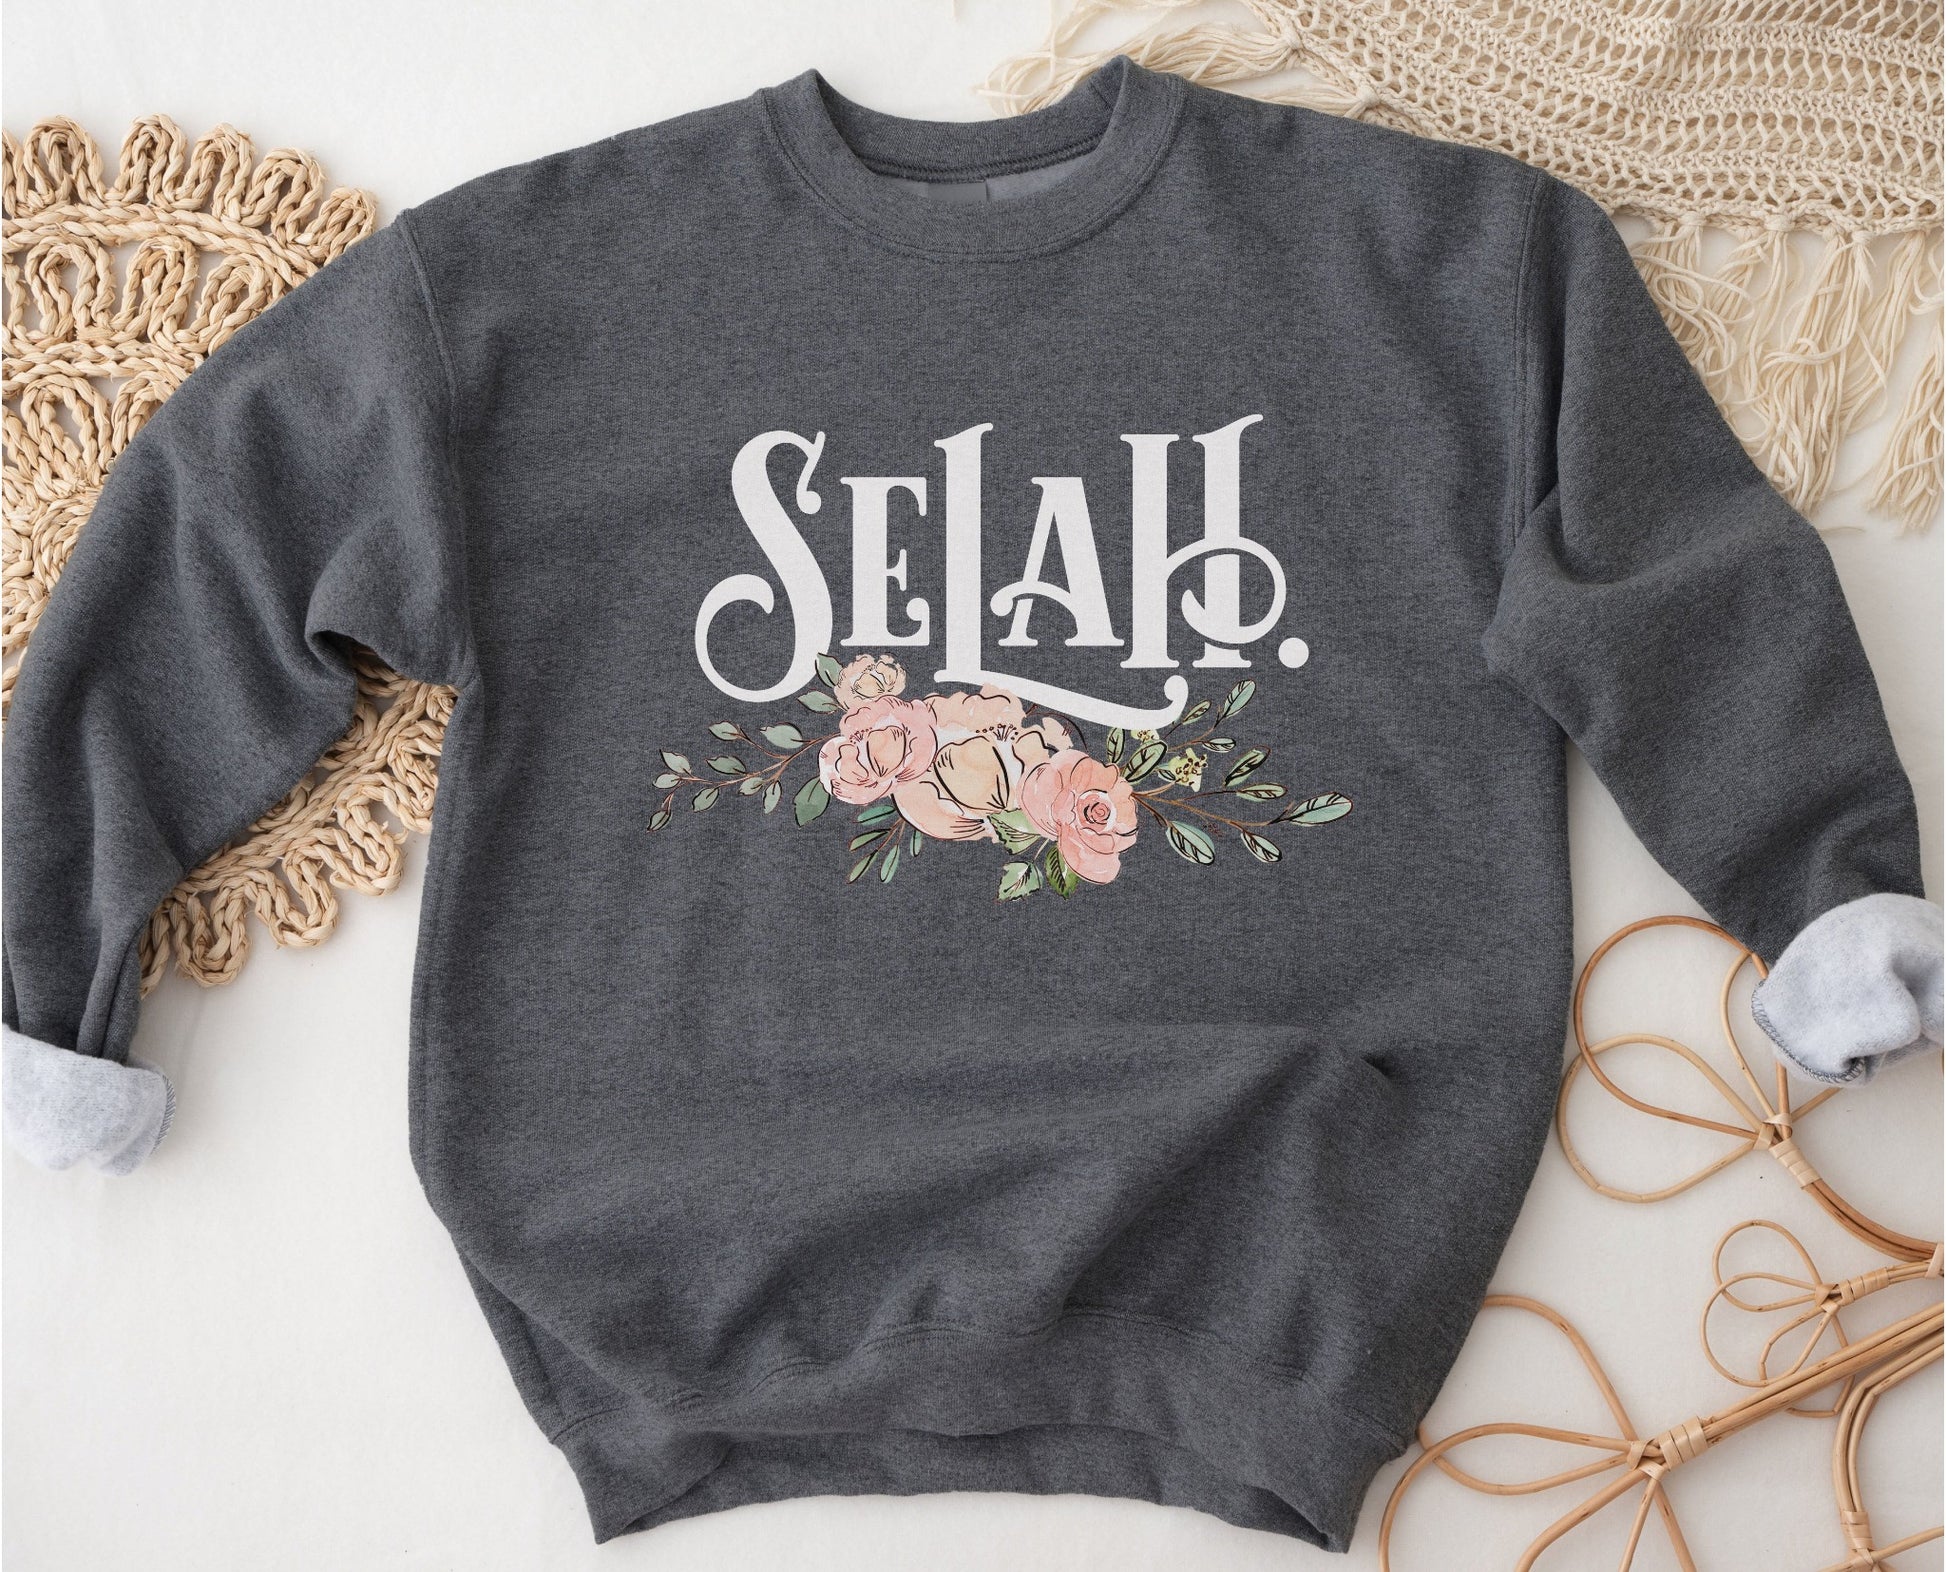 Selah Psalm watercolor floral Christian aesthetic design printed in white, peach, blush pink, and sage green on cozy heather dark gray unisex crewneck sweatshirt for women